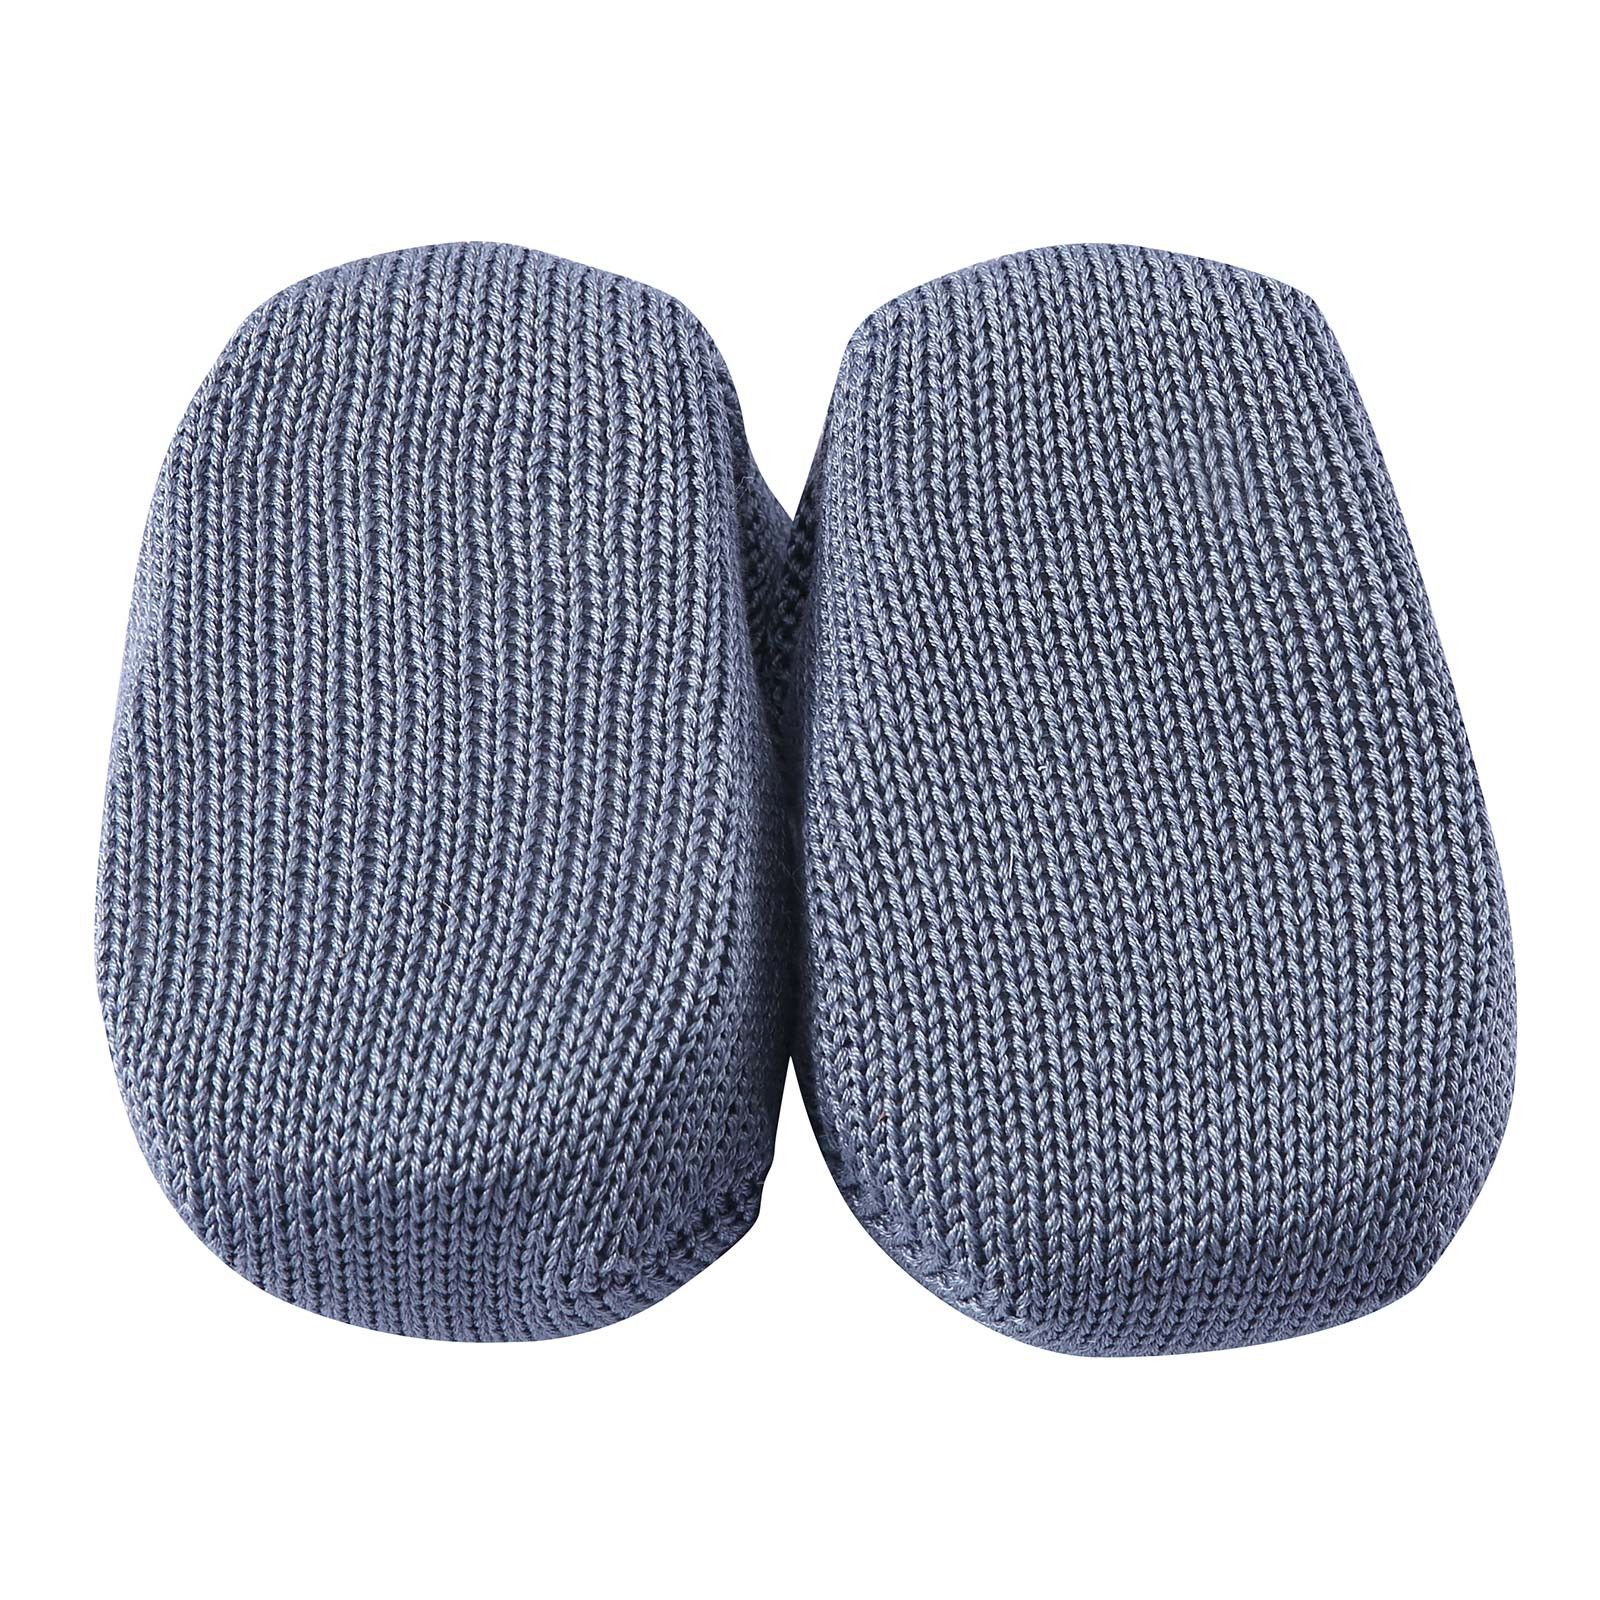 Baby Grey Knitted Cotton Shoes With Blue Tie Trims - CÉMAROSE | Children's Fashion Store - 4